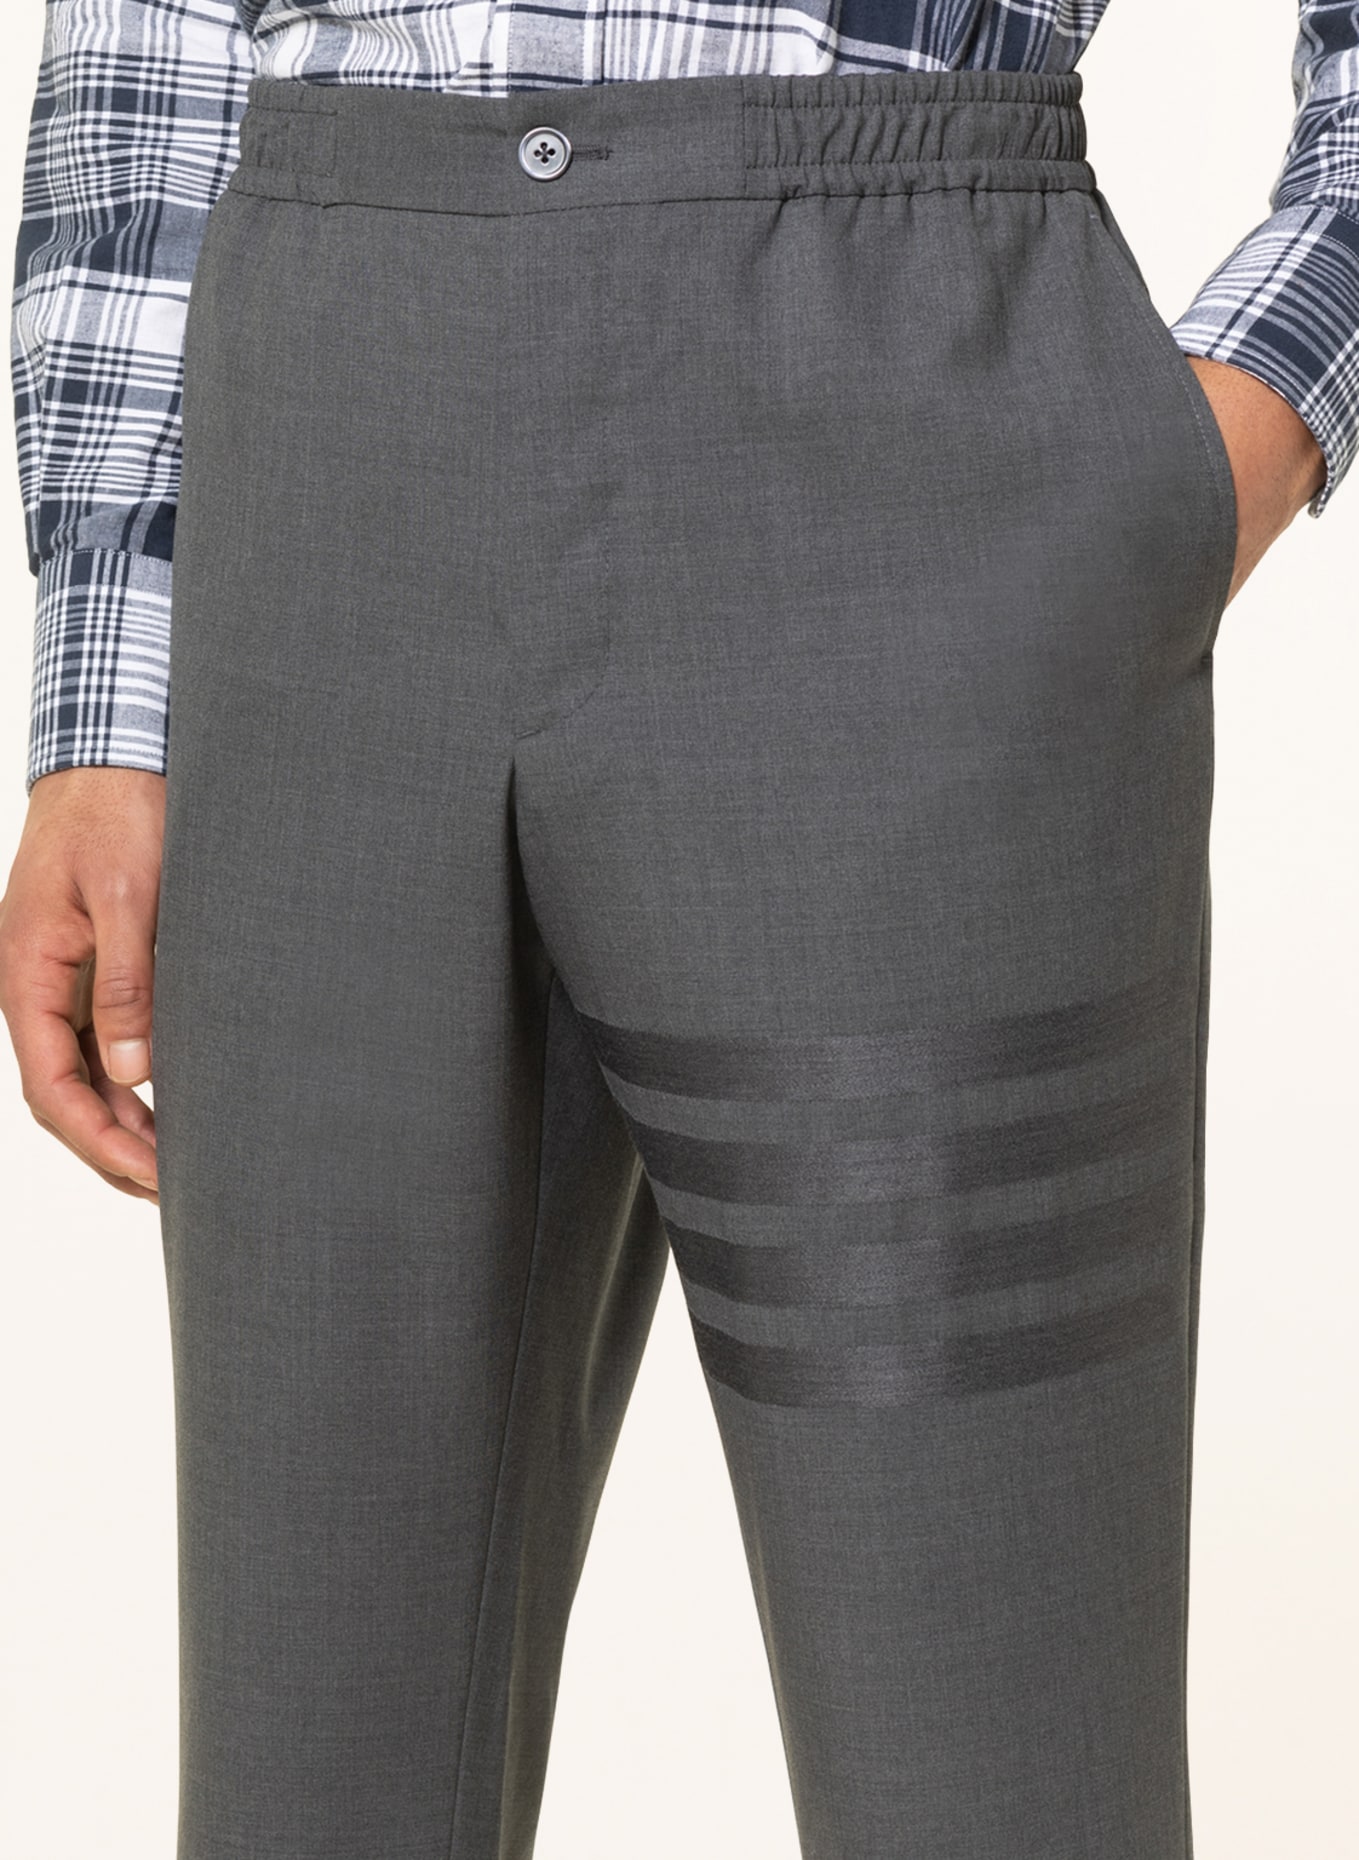 THOM BROWNE. Pants in jogger style extra slim fit, Color: DARK GRAY (Image 5)